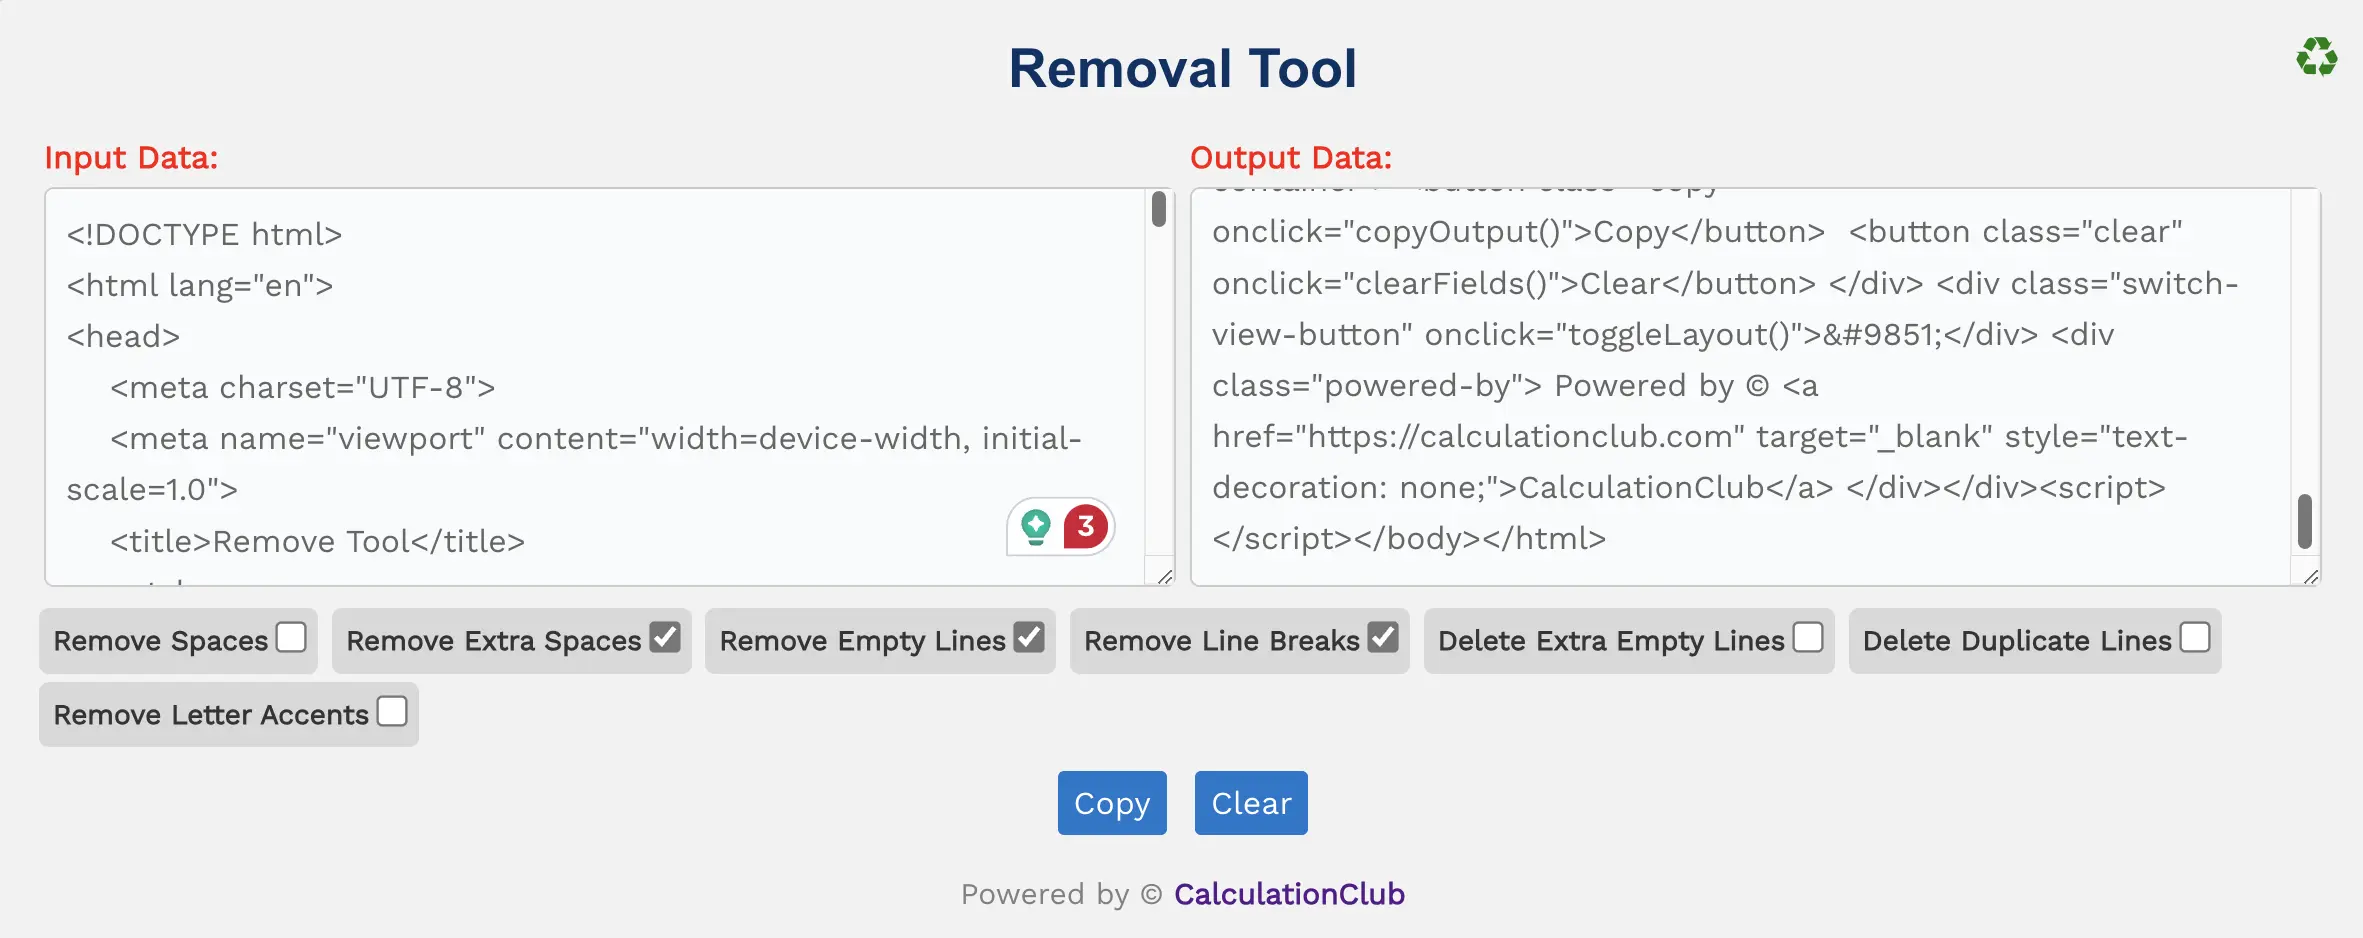 Removal Tool | CalculationClub